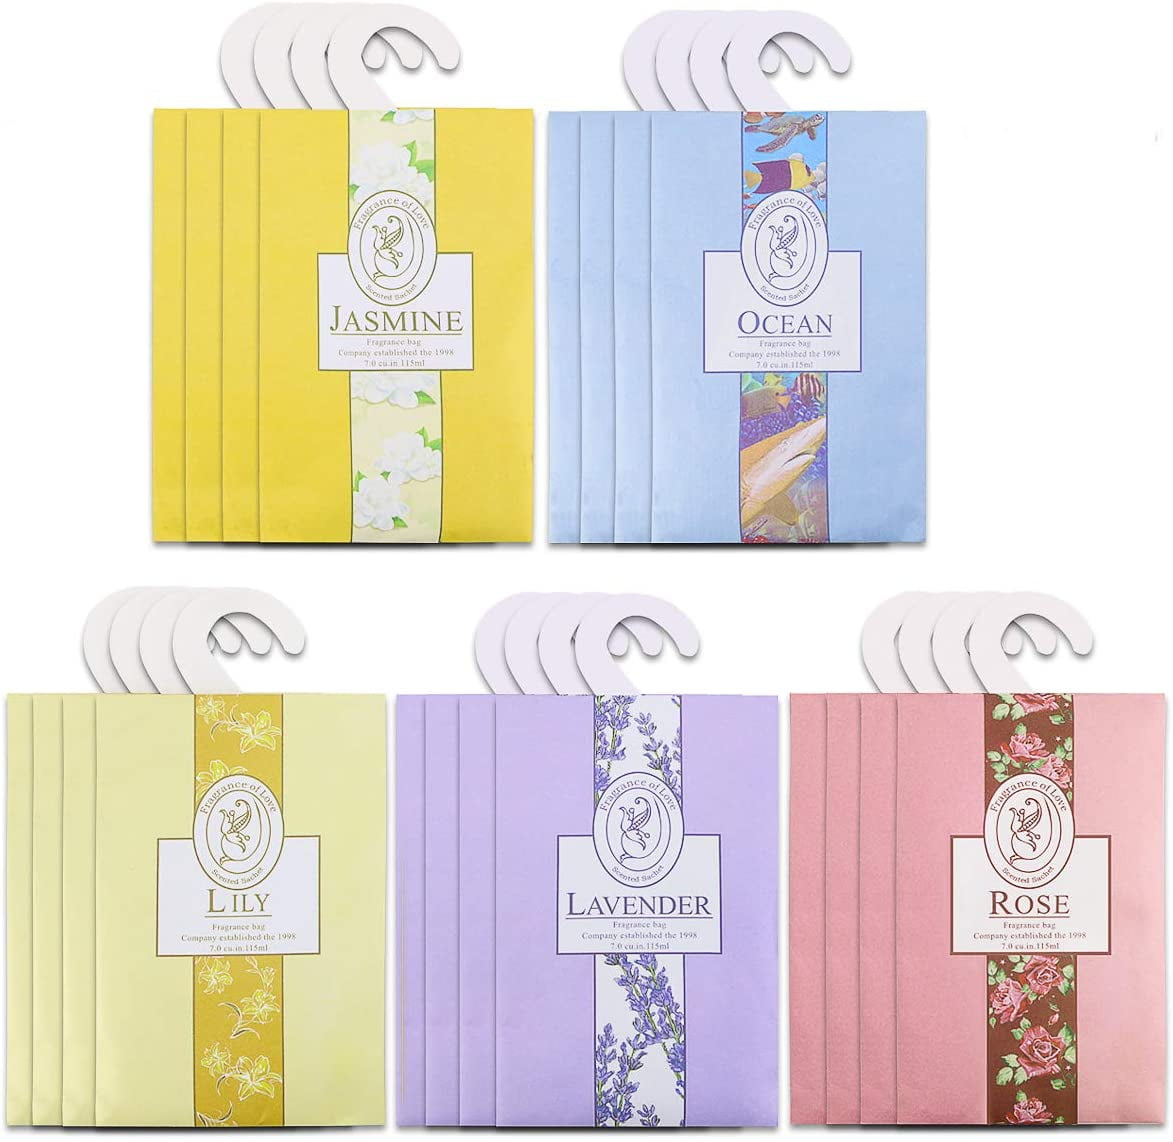 Scented Sachets Sample Pack of 3 Vanilla, Lavender and Ocean Breeze Scent  Drawers and Closets Moth Repellent Car Freshener 